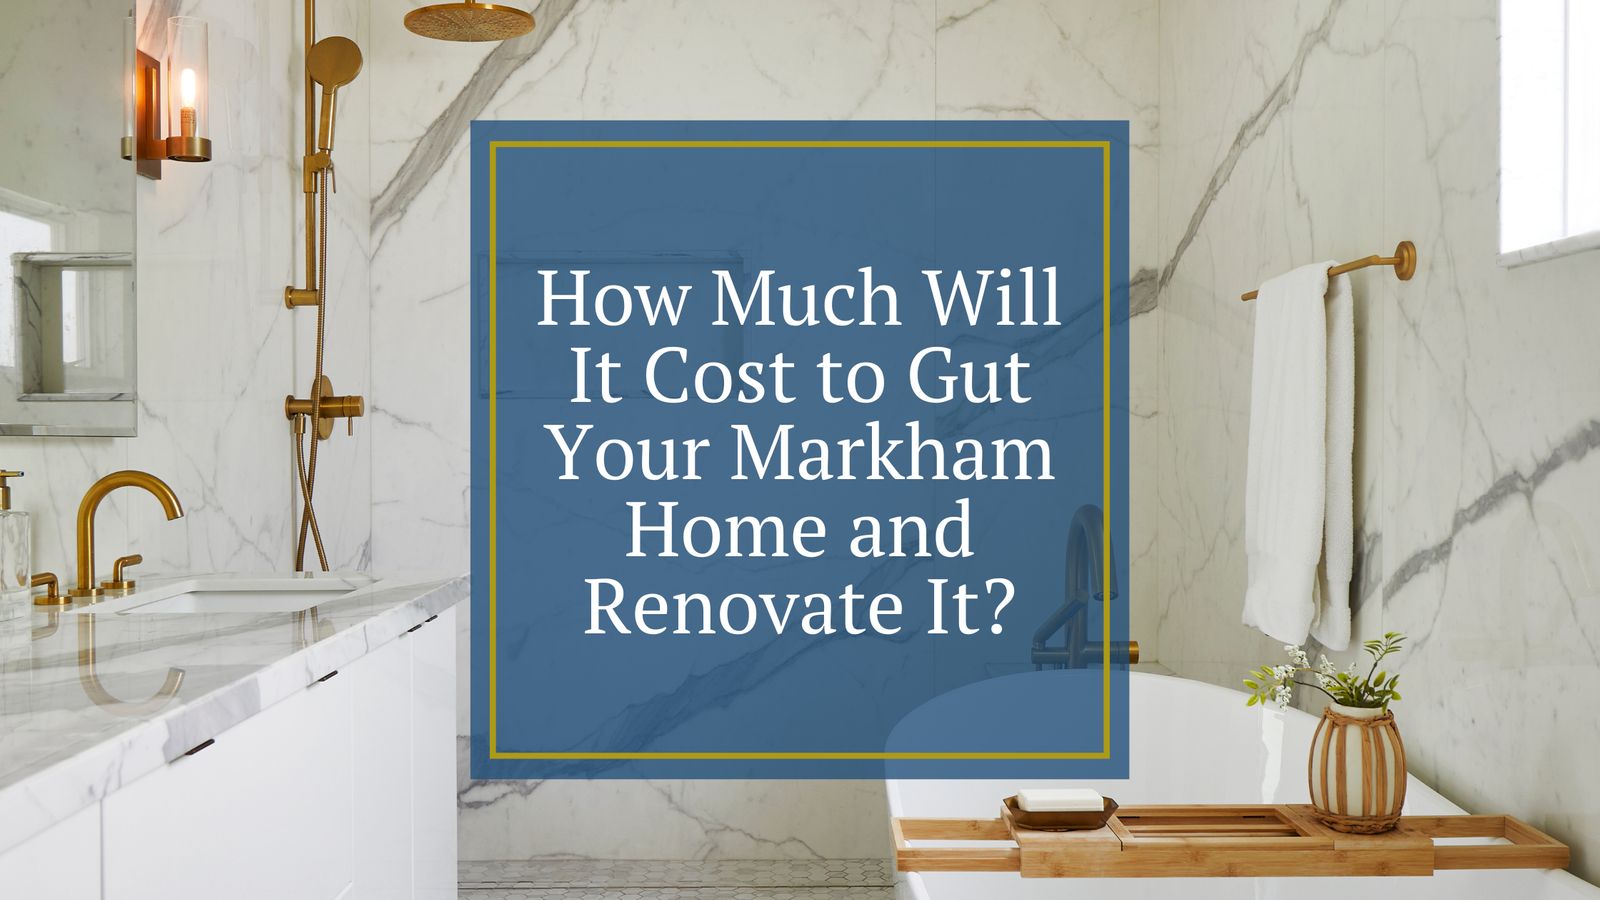 How Much Will It Cost to Gut Your Markham Home and Renovate It?